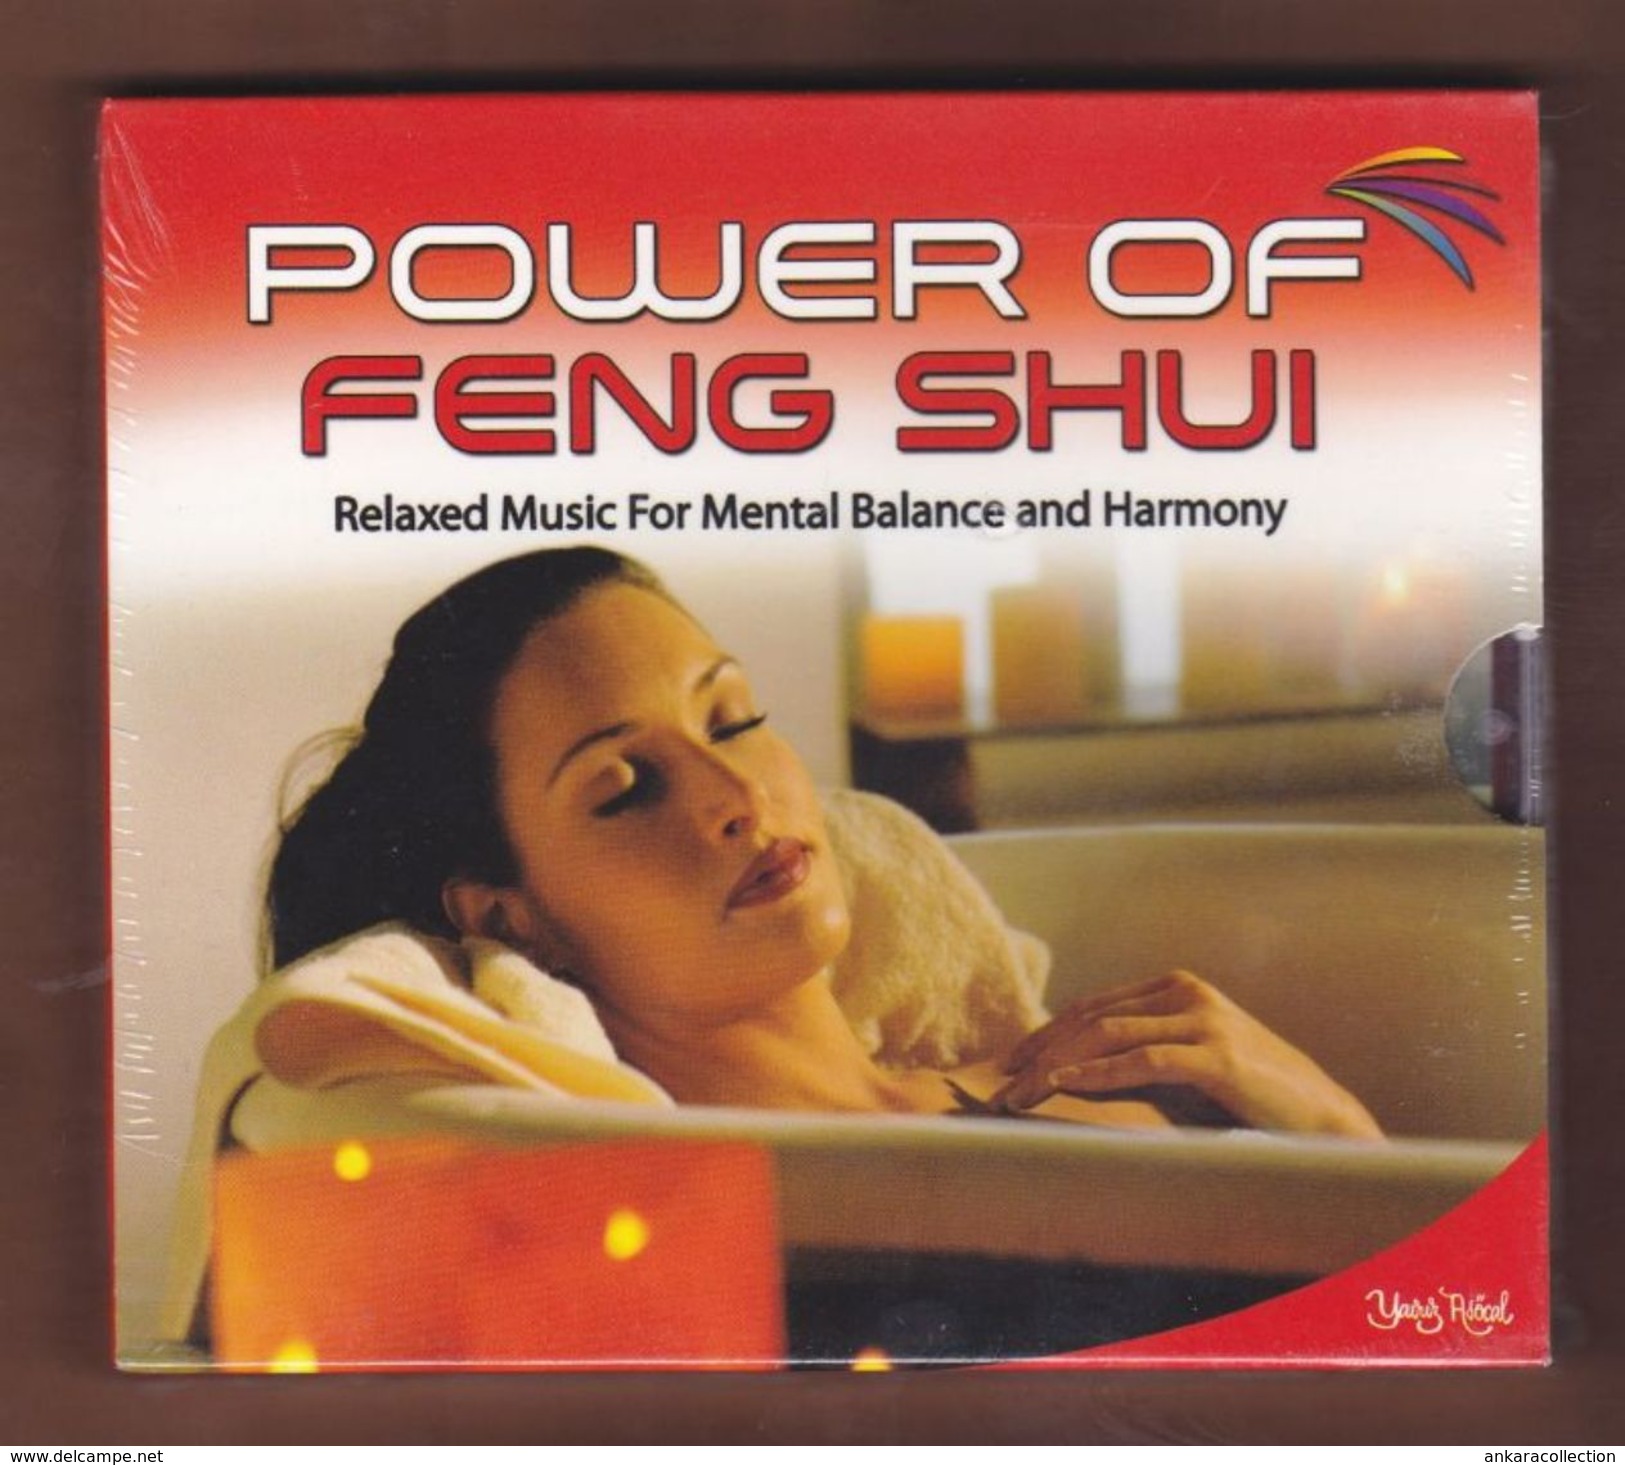 AC - POWER OF FENG SHUI RELAXED MUSIC FOR MENTAL BALANCE AND HARMONY BRAND NEW TURKISH MUSIC CD - Música Del Mundo